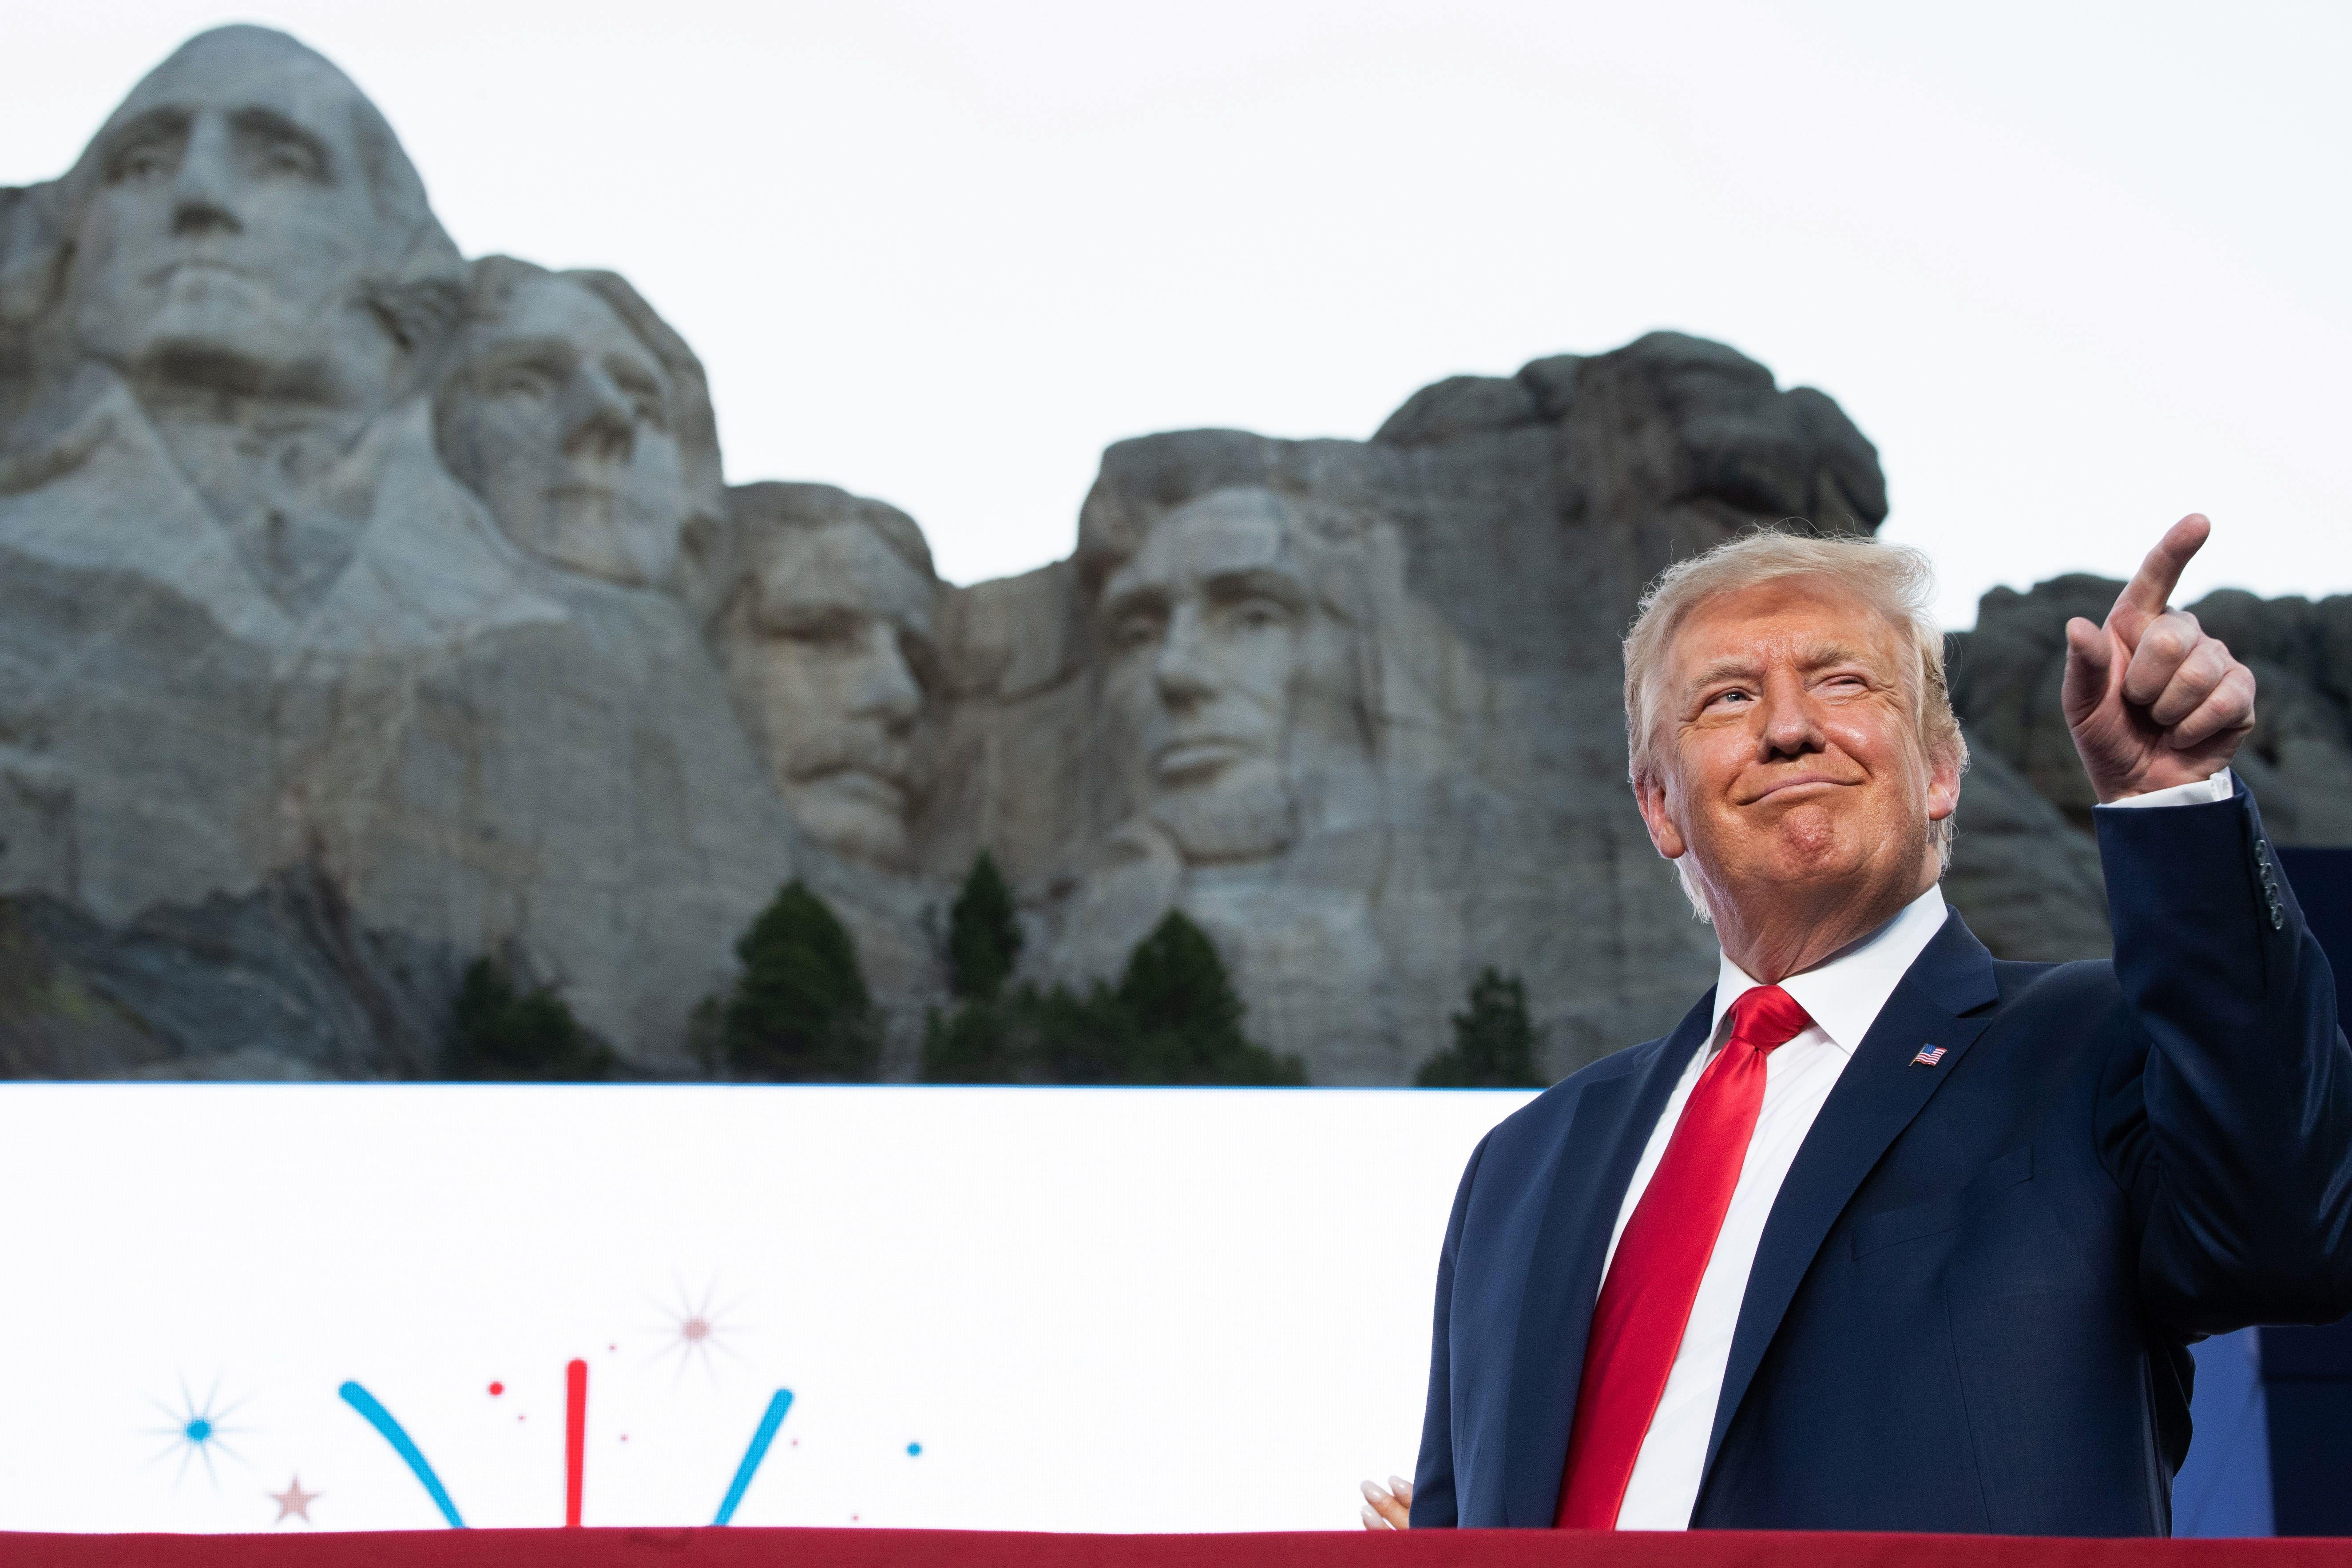 Donald Trump points and smiles while standing in front of Mount Rushmore.